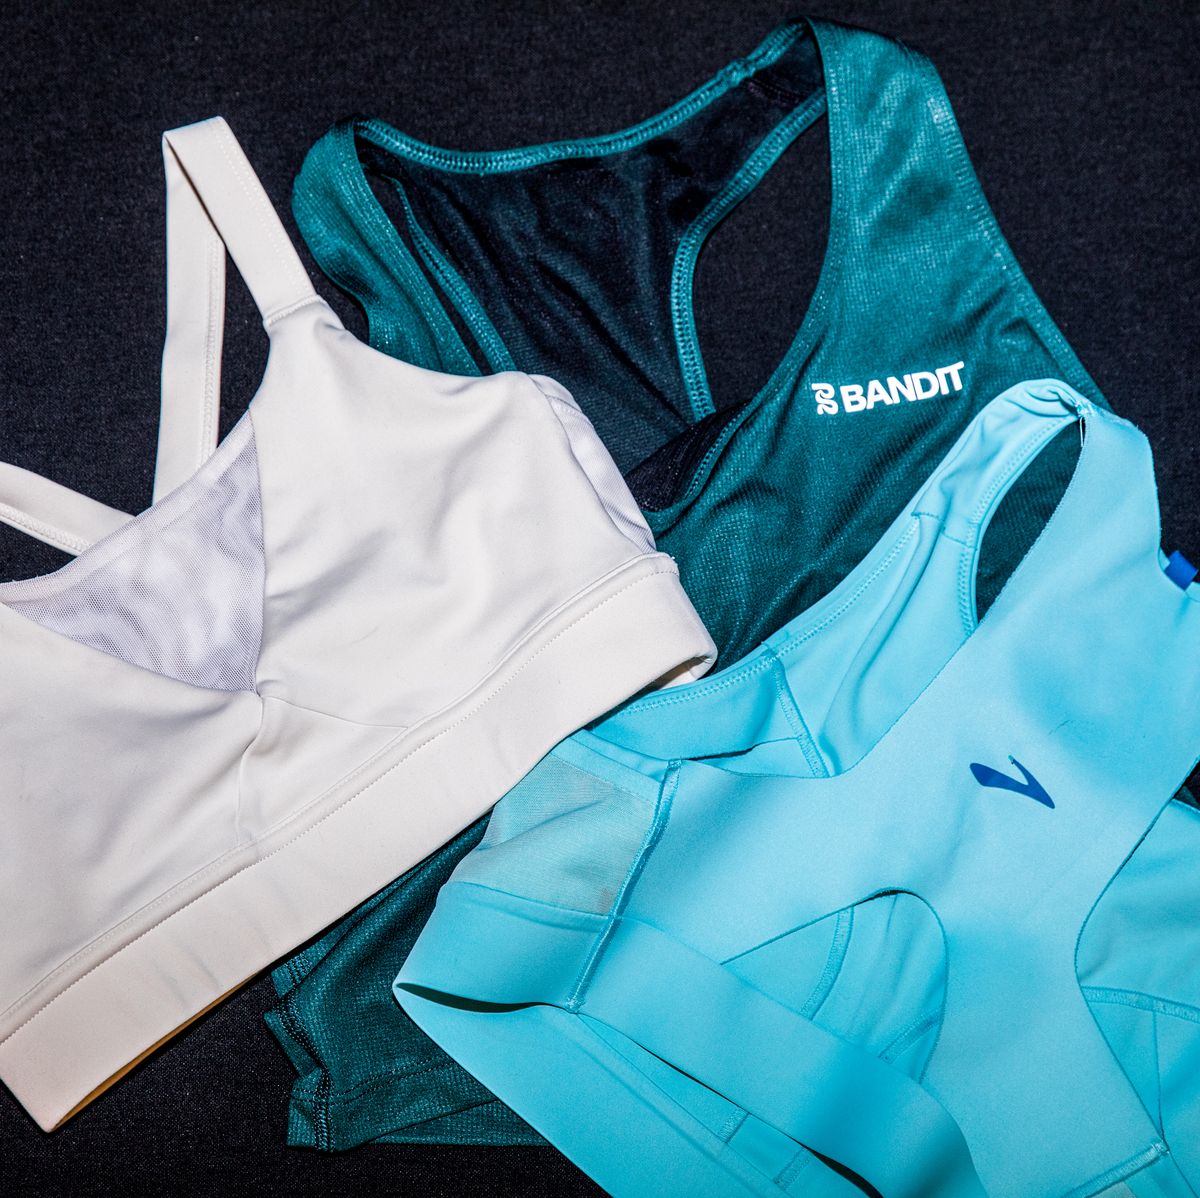 Cloud-like comfort, second-skin feel, the no-bra bra. Someone pls stop  us…we could go on about Alate sports bras forever. Designed to s